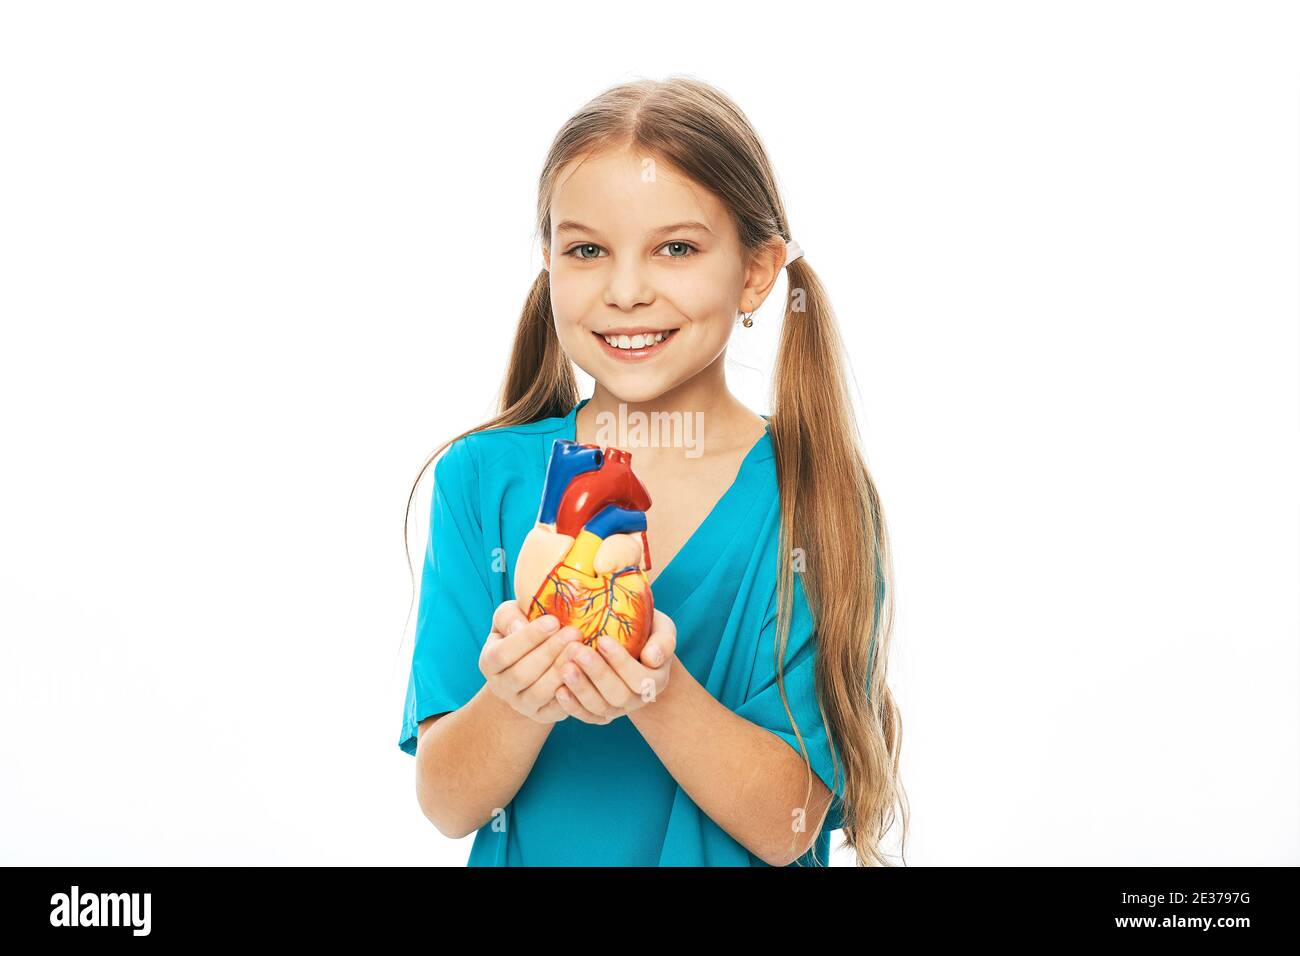 Girl holding an anatomical heart model in hands. Concept of cardiac health and diagnosis of children's heart disease Stock Photo